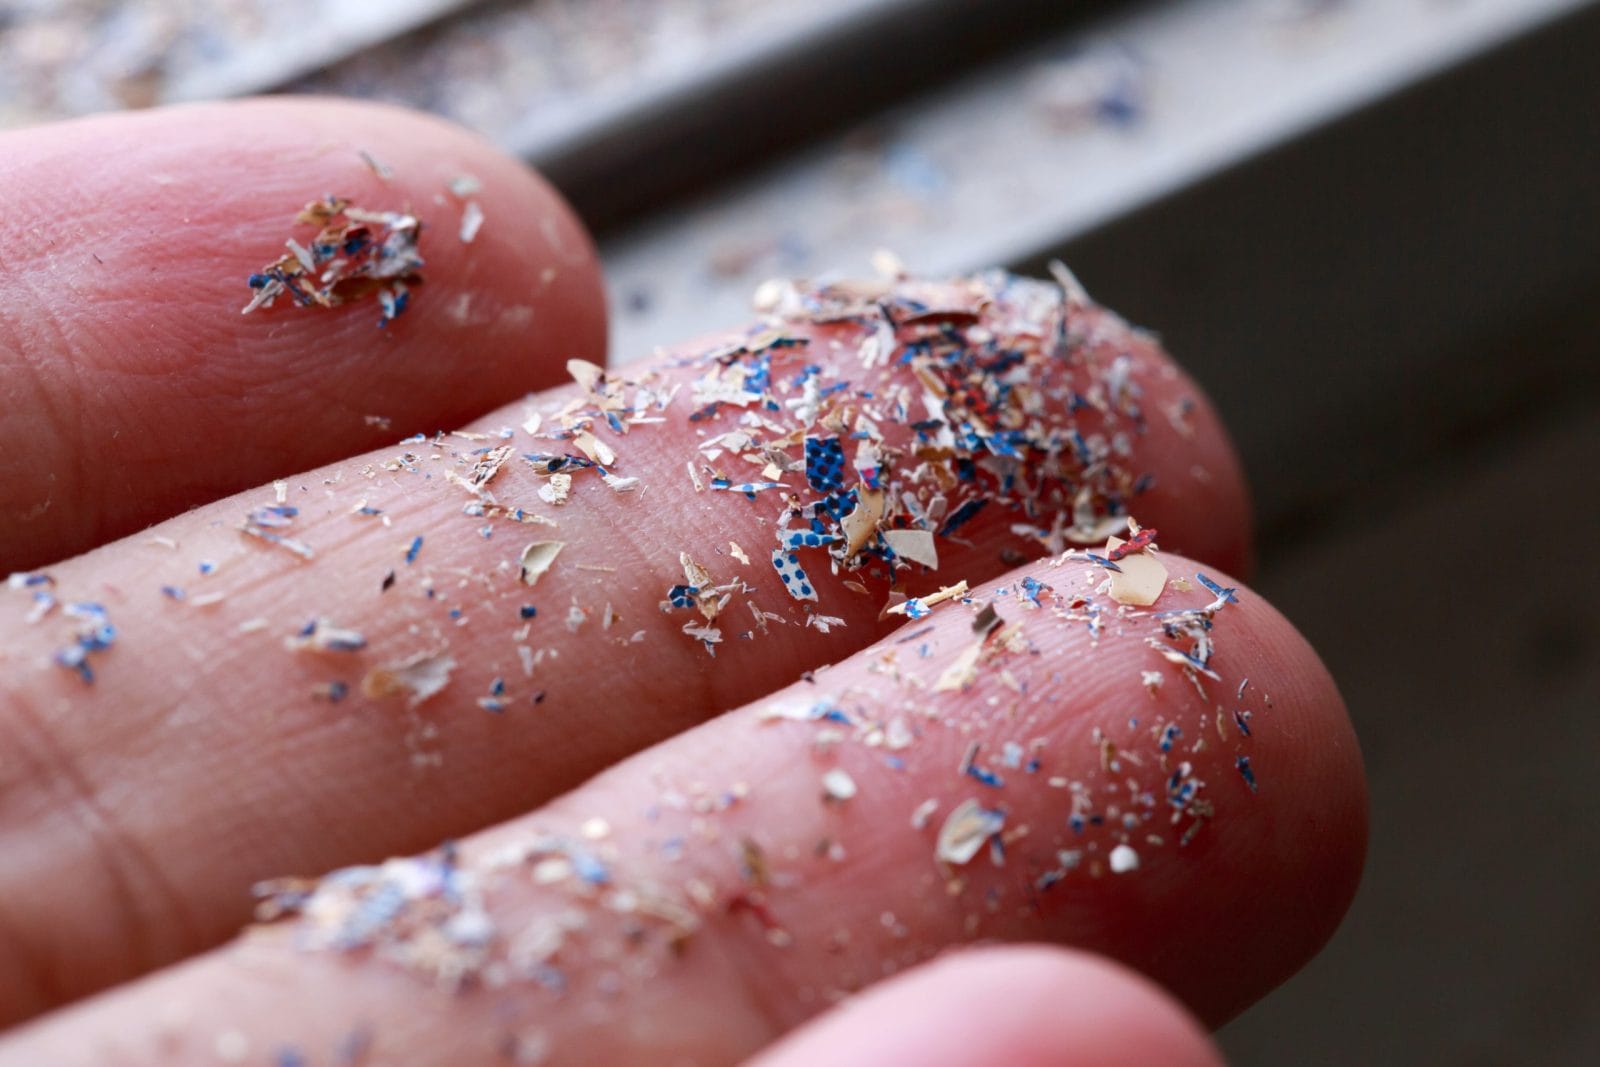 Microplastics Are Disrupting Metabolism of Lung and Liver Cells, New Study Finds 